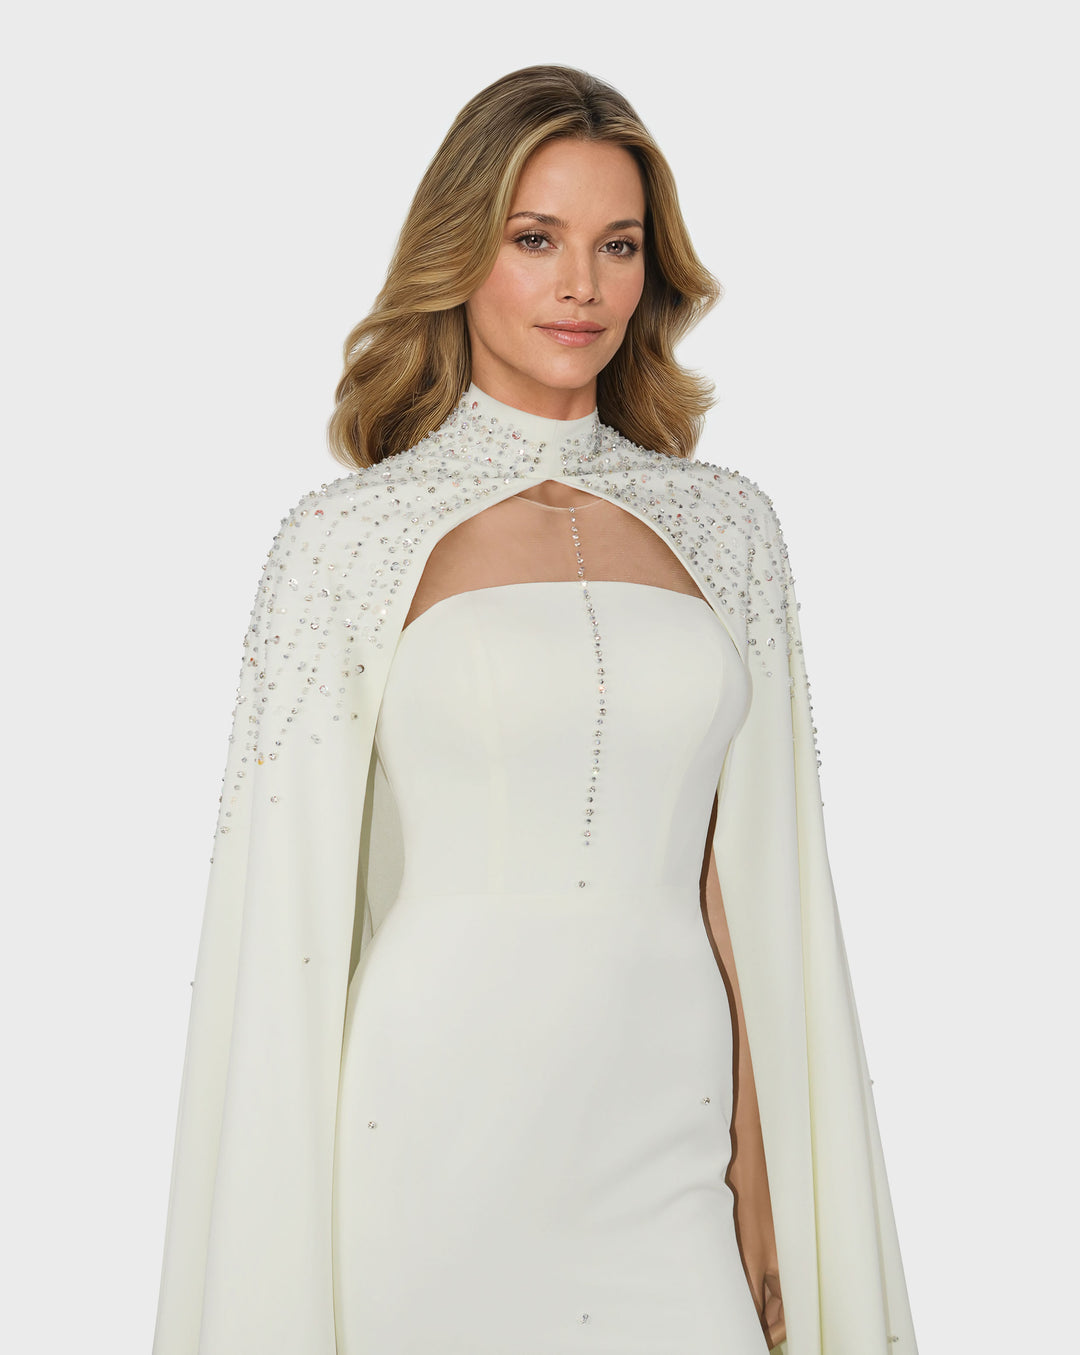 Beaded ivory column dress with high neck cape